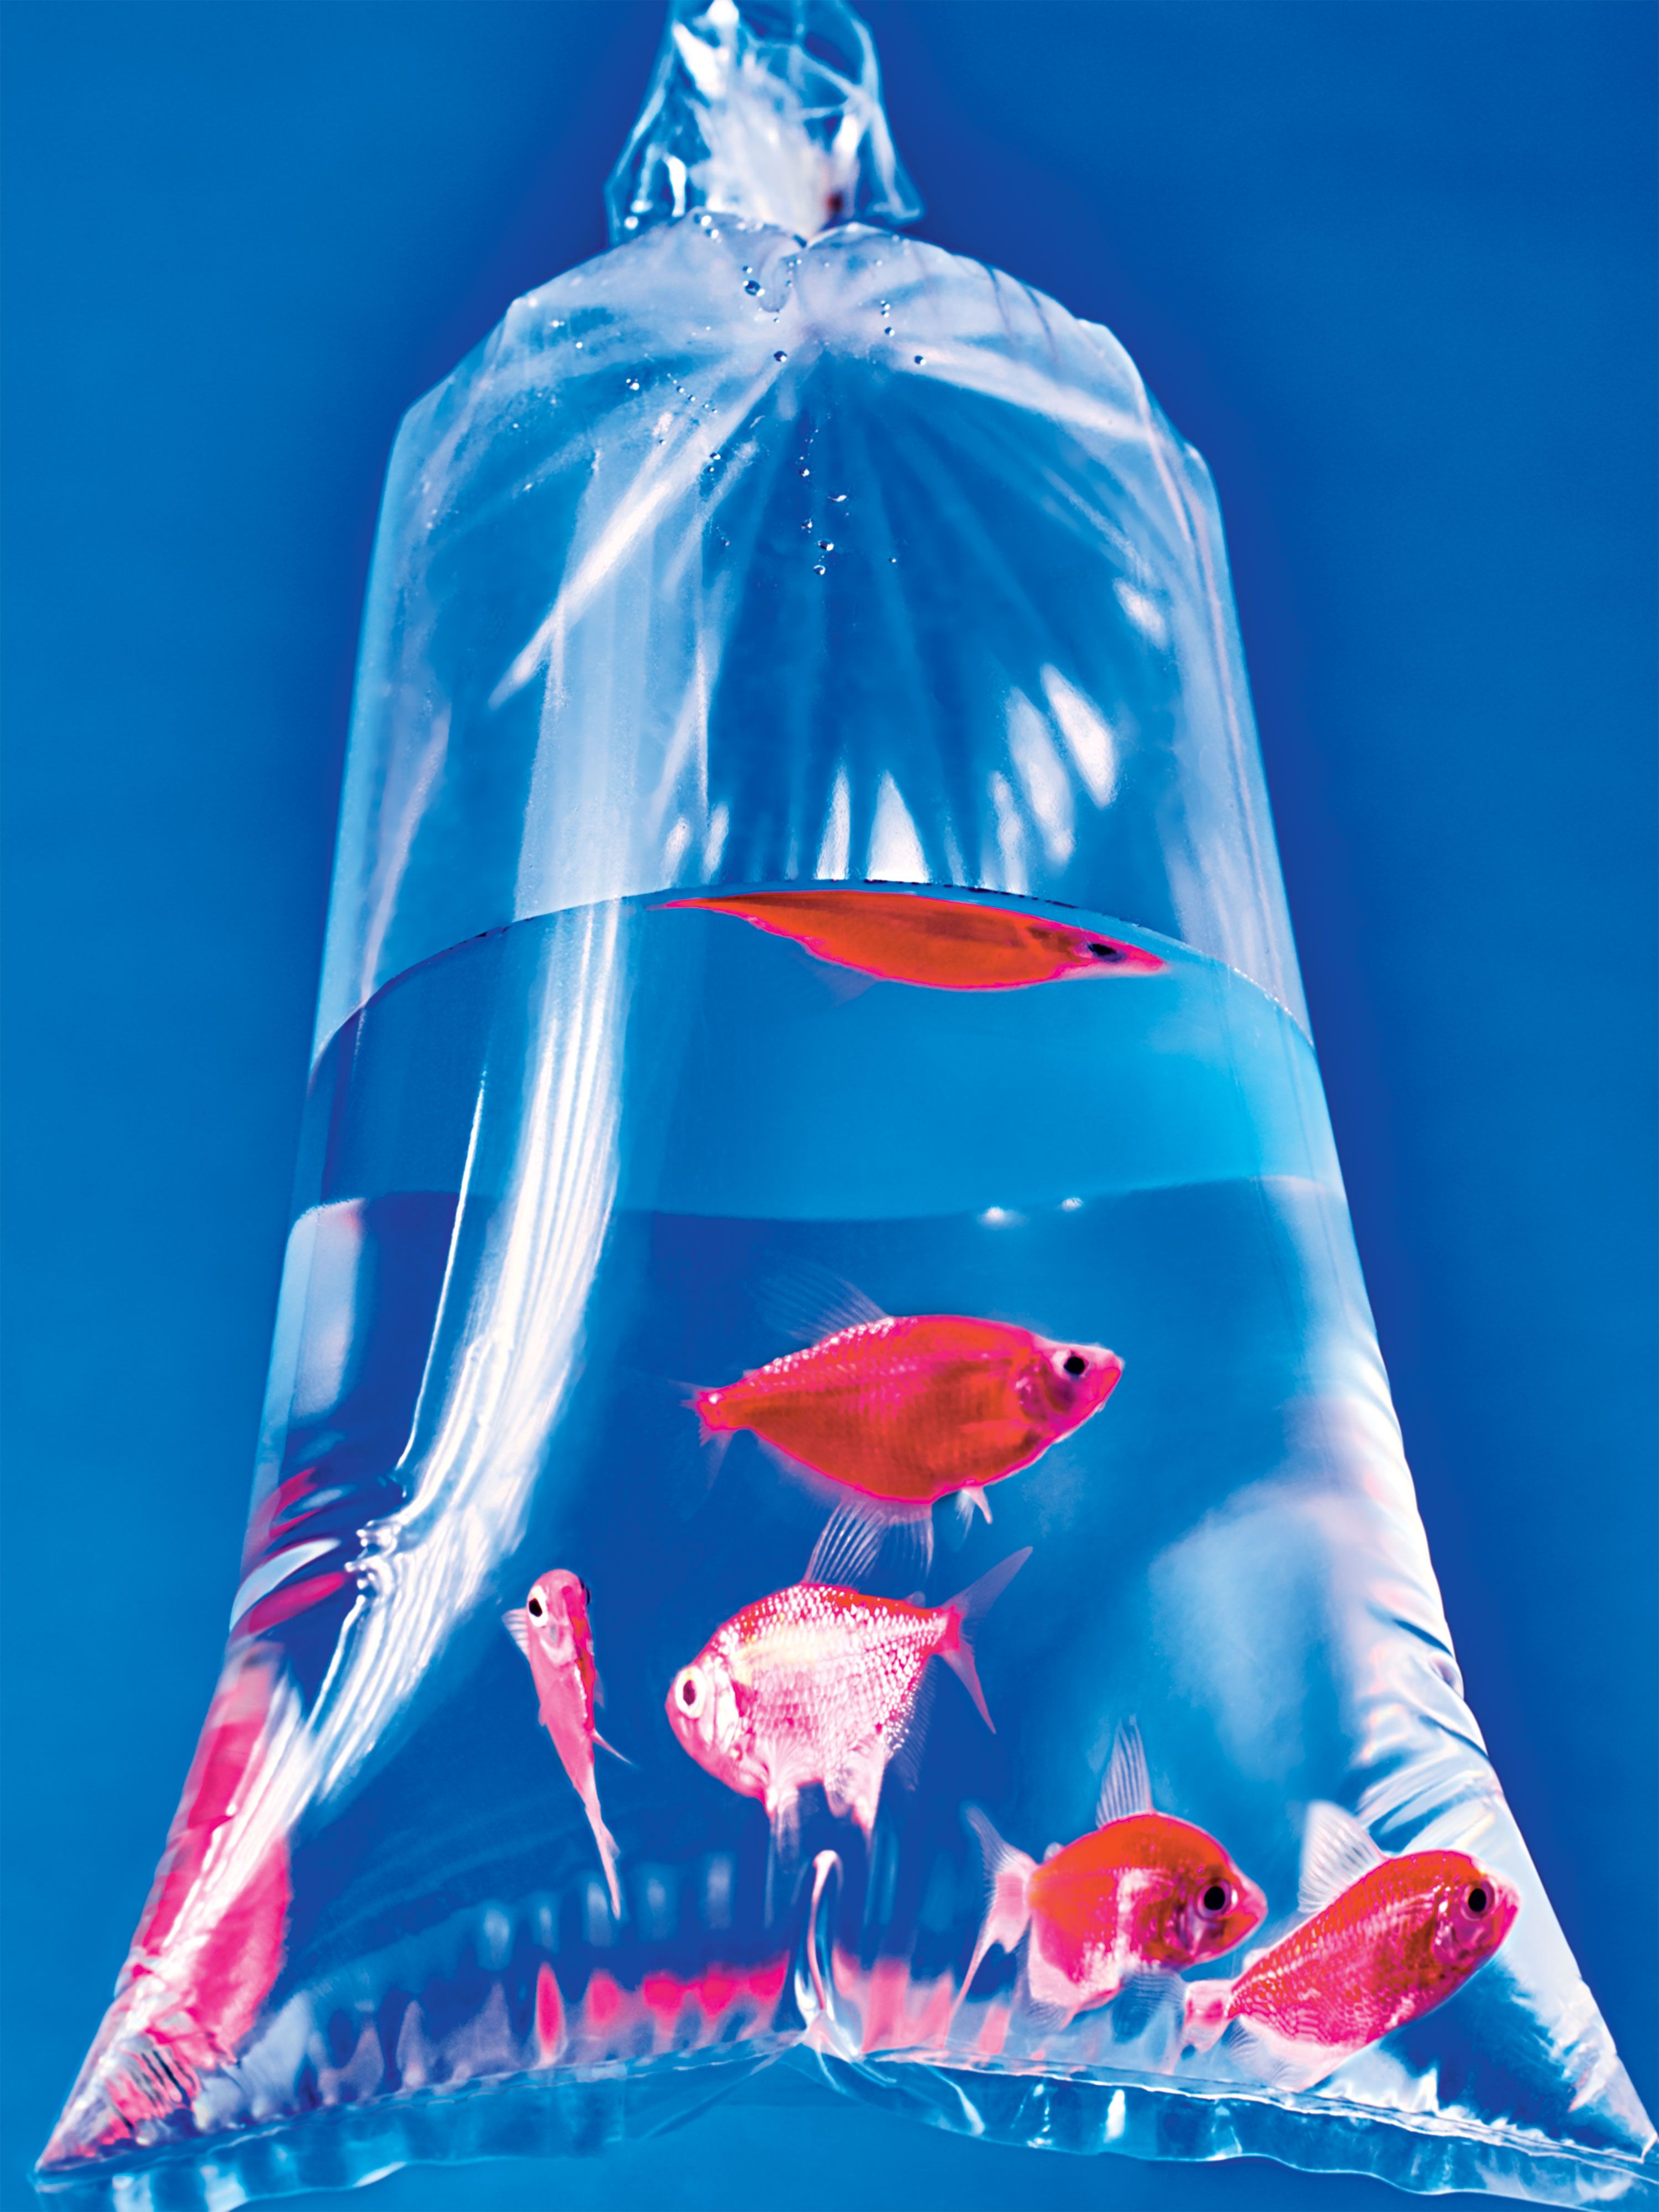 Vergoeding gans fluiten Everything You Need to Build Your Own '80s Aquarium | The Strategist